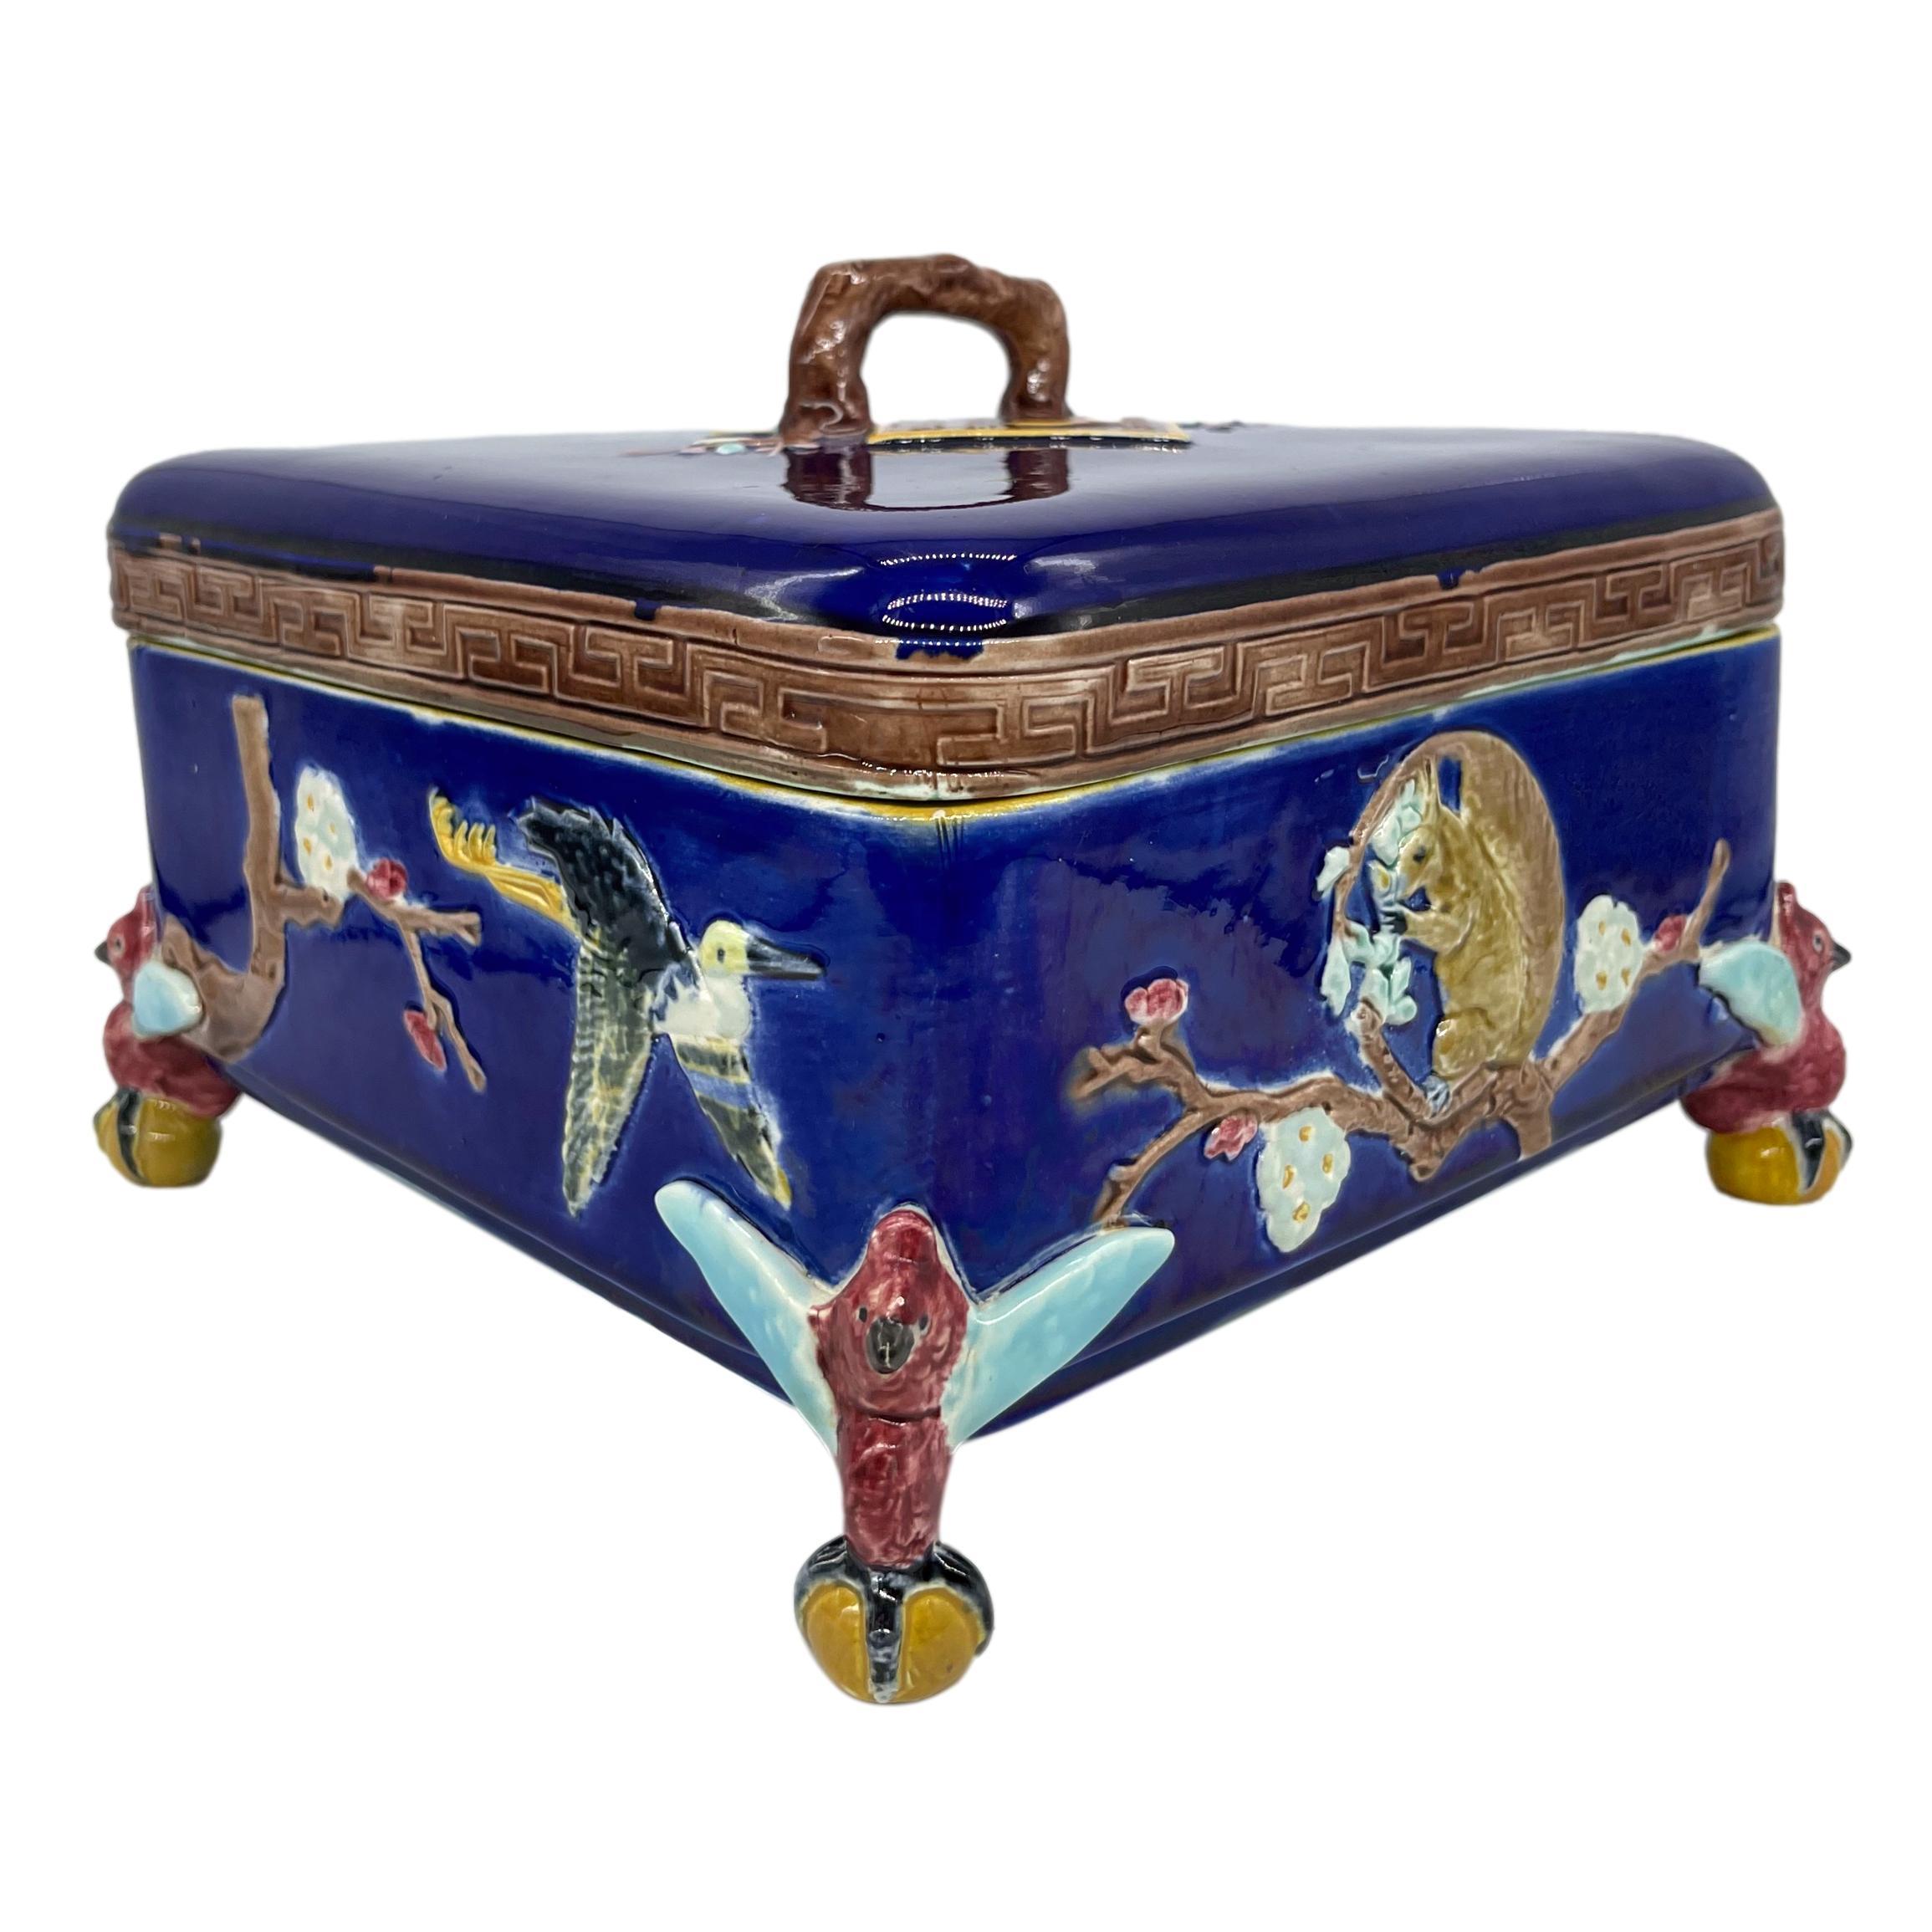 Joseph Holdcroft Majolica Japonisme square shaped box and cover, glazed in cobalt blue, with relief molded flying cranes, flowering prunus branches, and squirrels, the cover bordered with a Greek key design, with a prunus branch handle above two